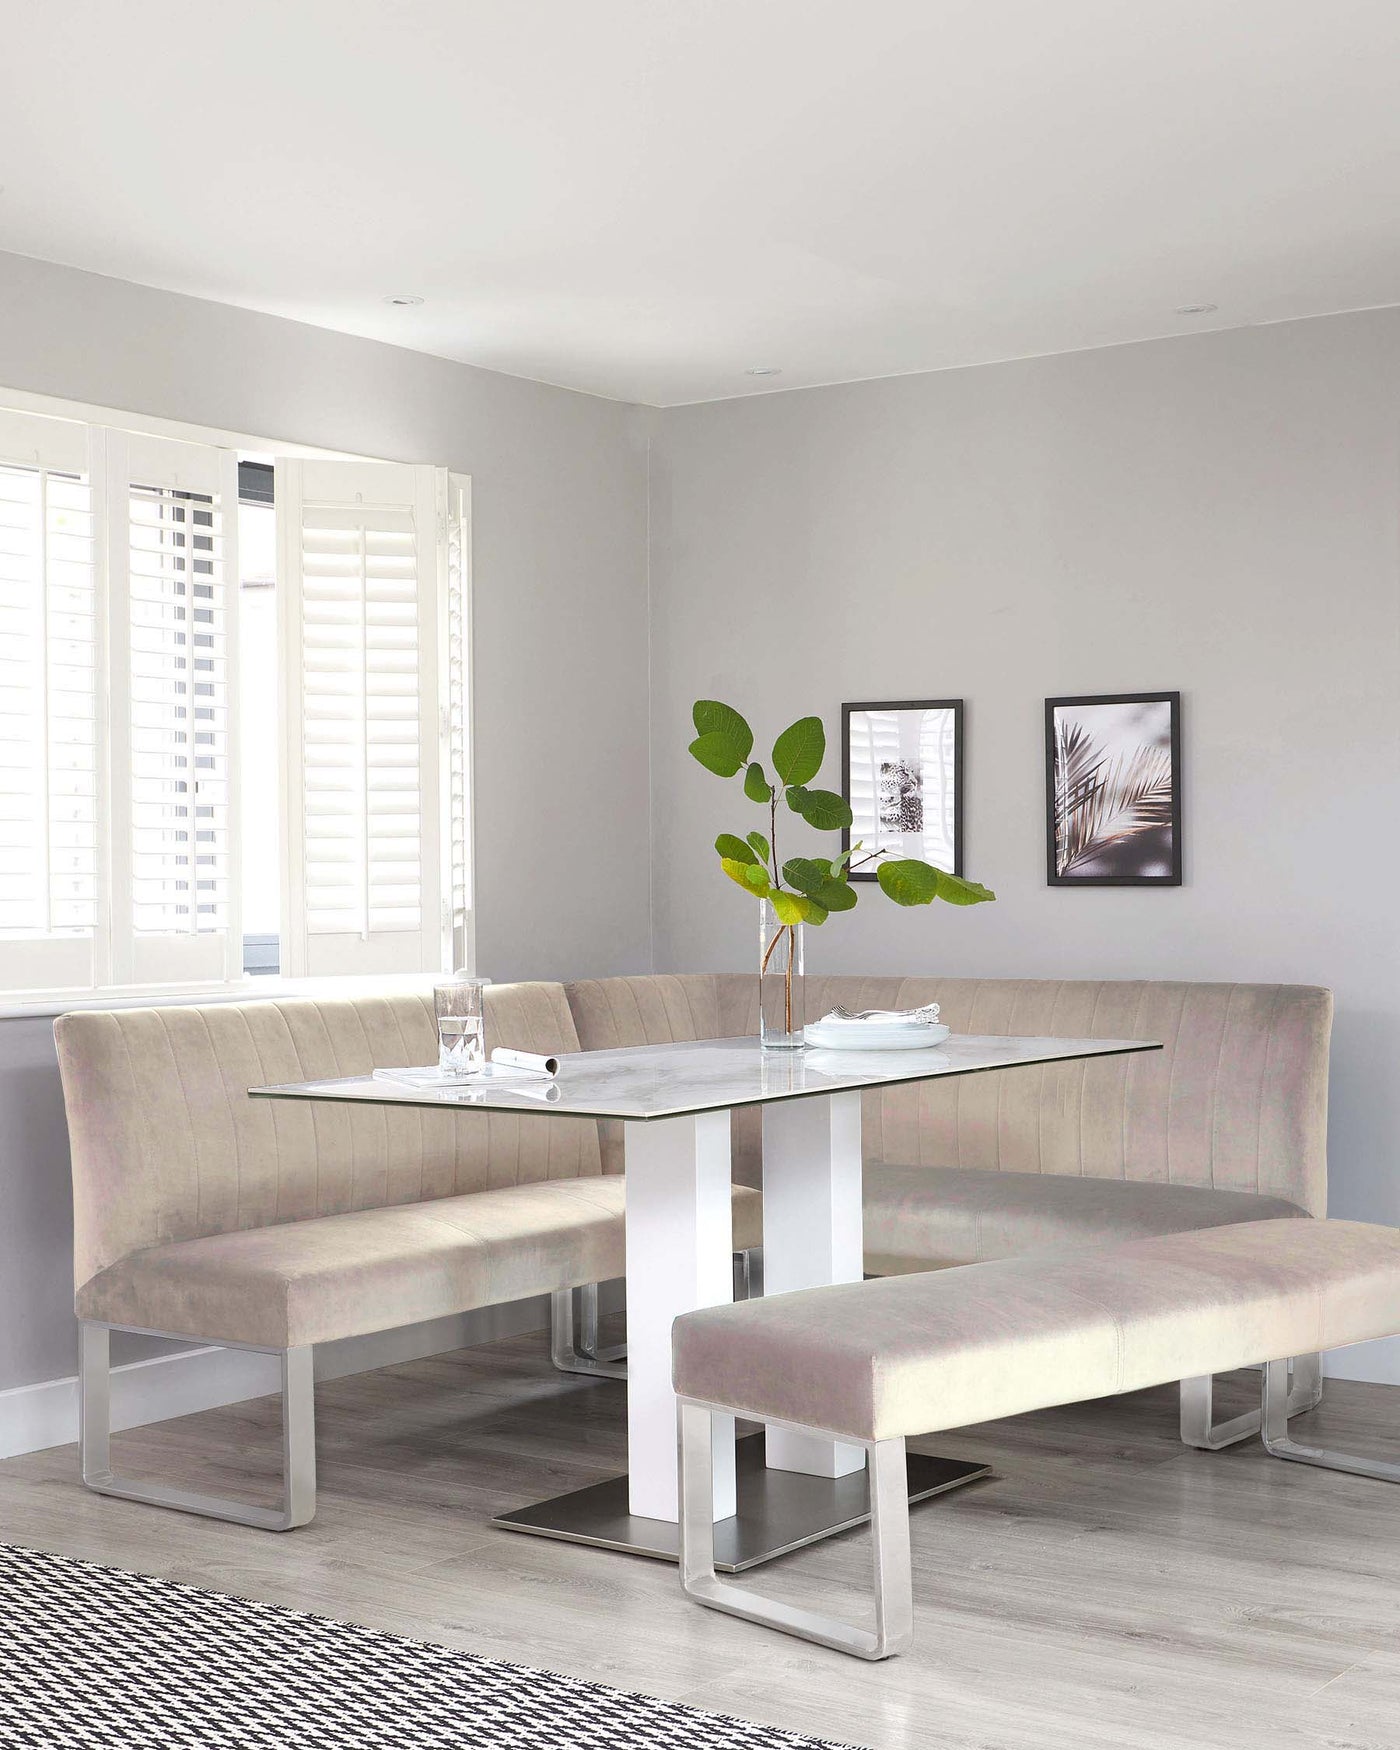 Modern dining set featuring a rectangular marble top table with a white and silver base, accompanied by a matching beige upholstered corner bench with a backrest and a coordinating dining bench without a backrest.